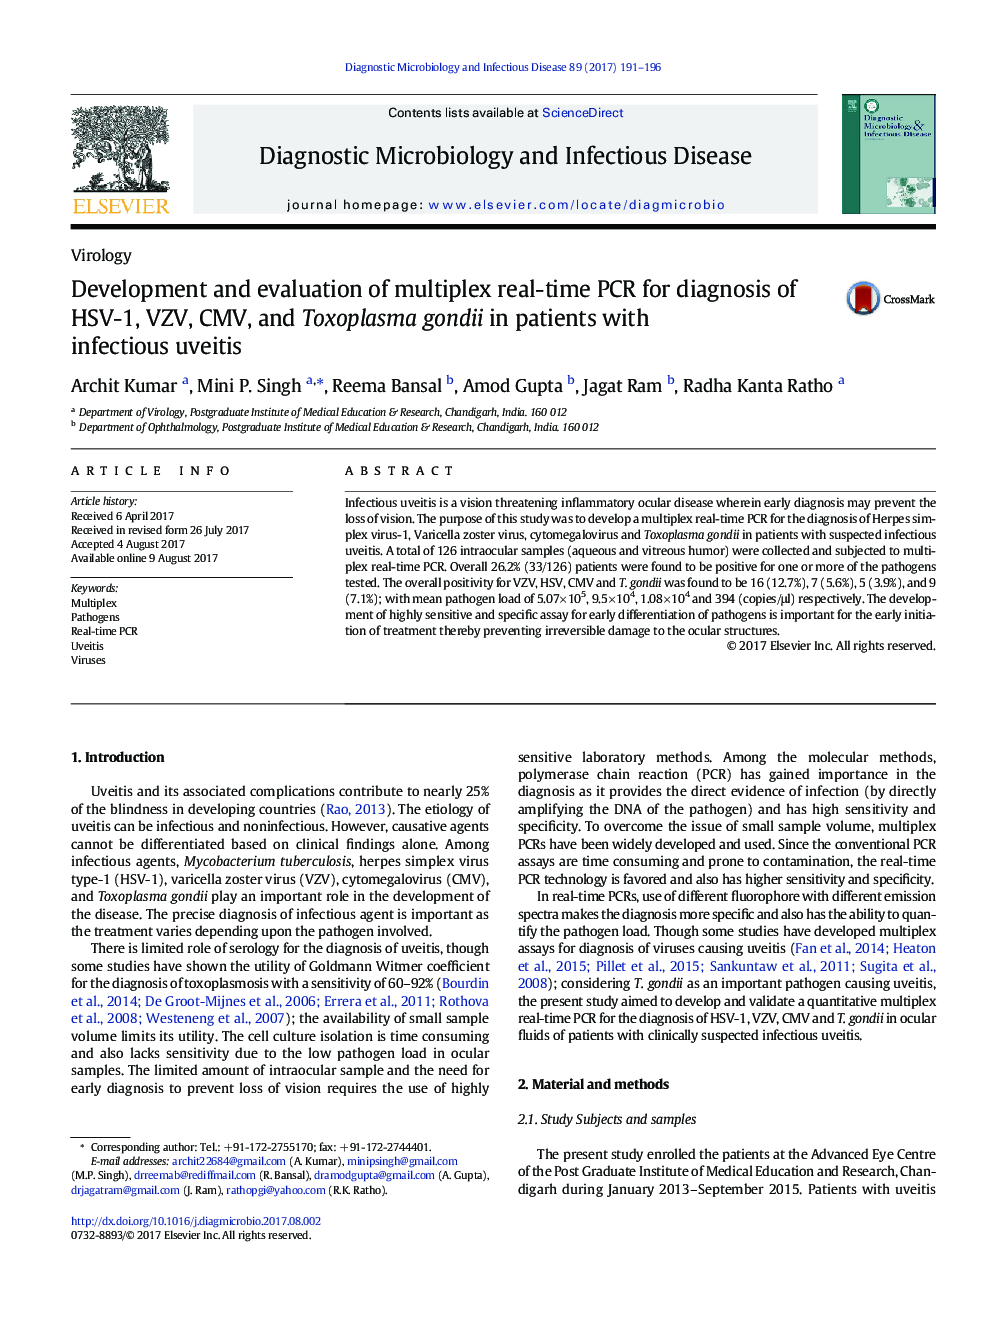 Development and evaluation of multiplex real-time PCR for diagnosis of HSV-1, VZV, CMV, and Toxoplasma gondii in patients with infectious uveitis